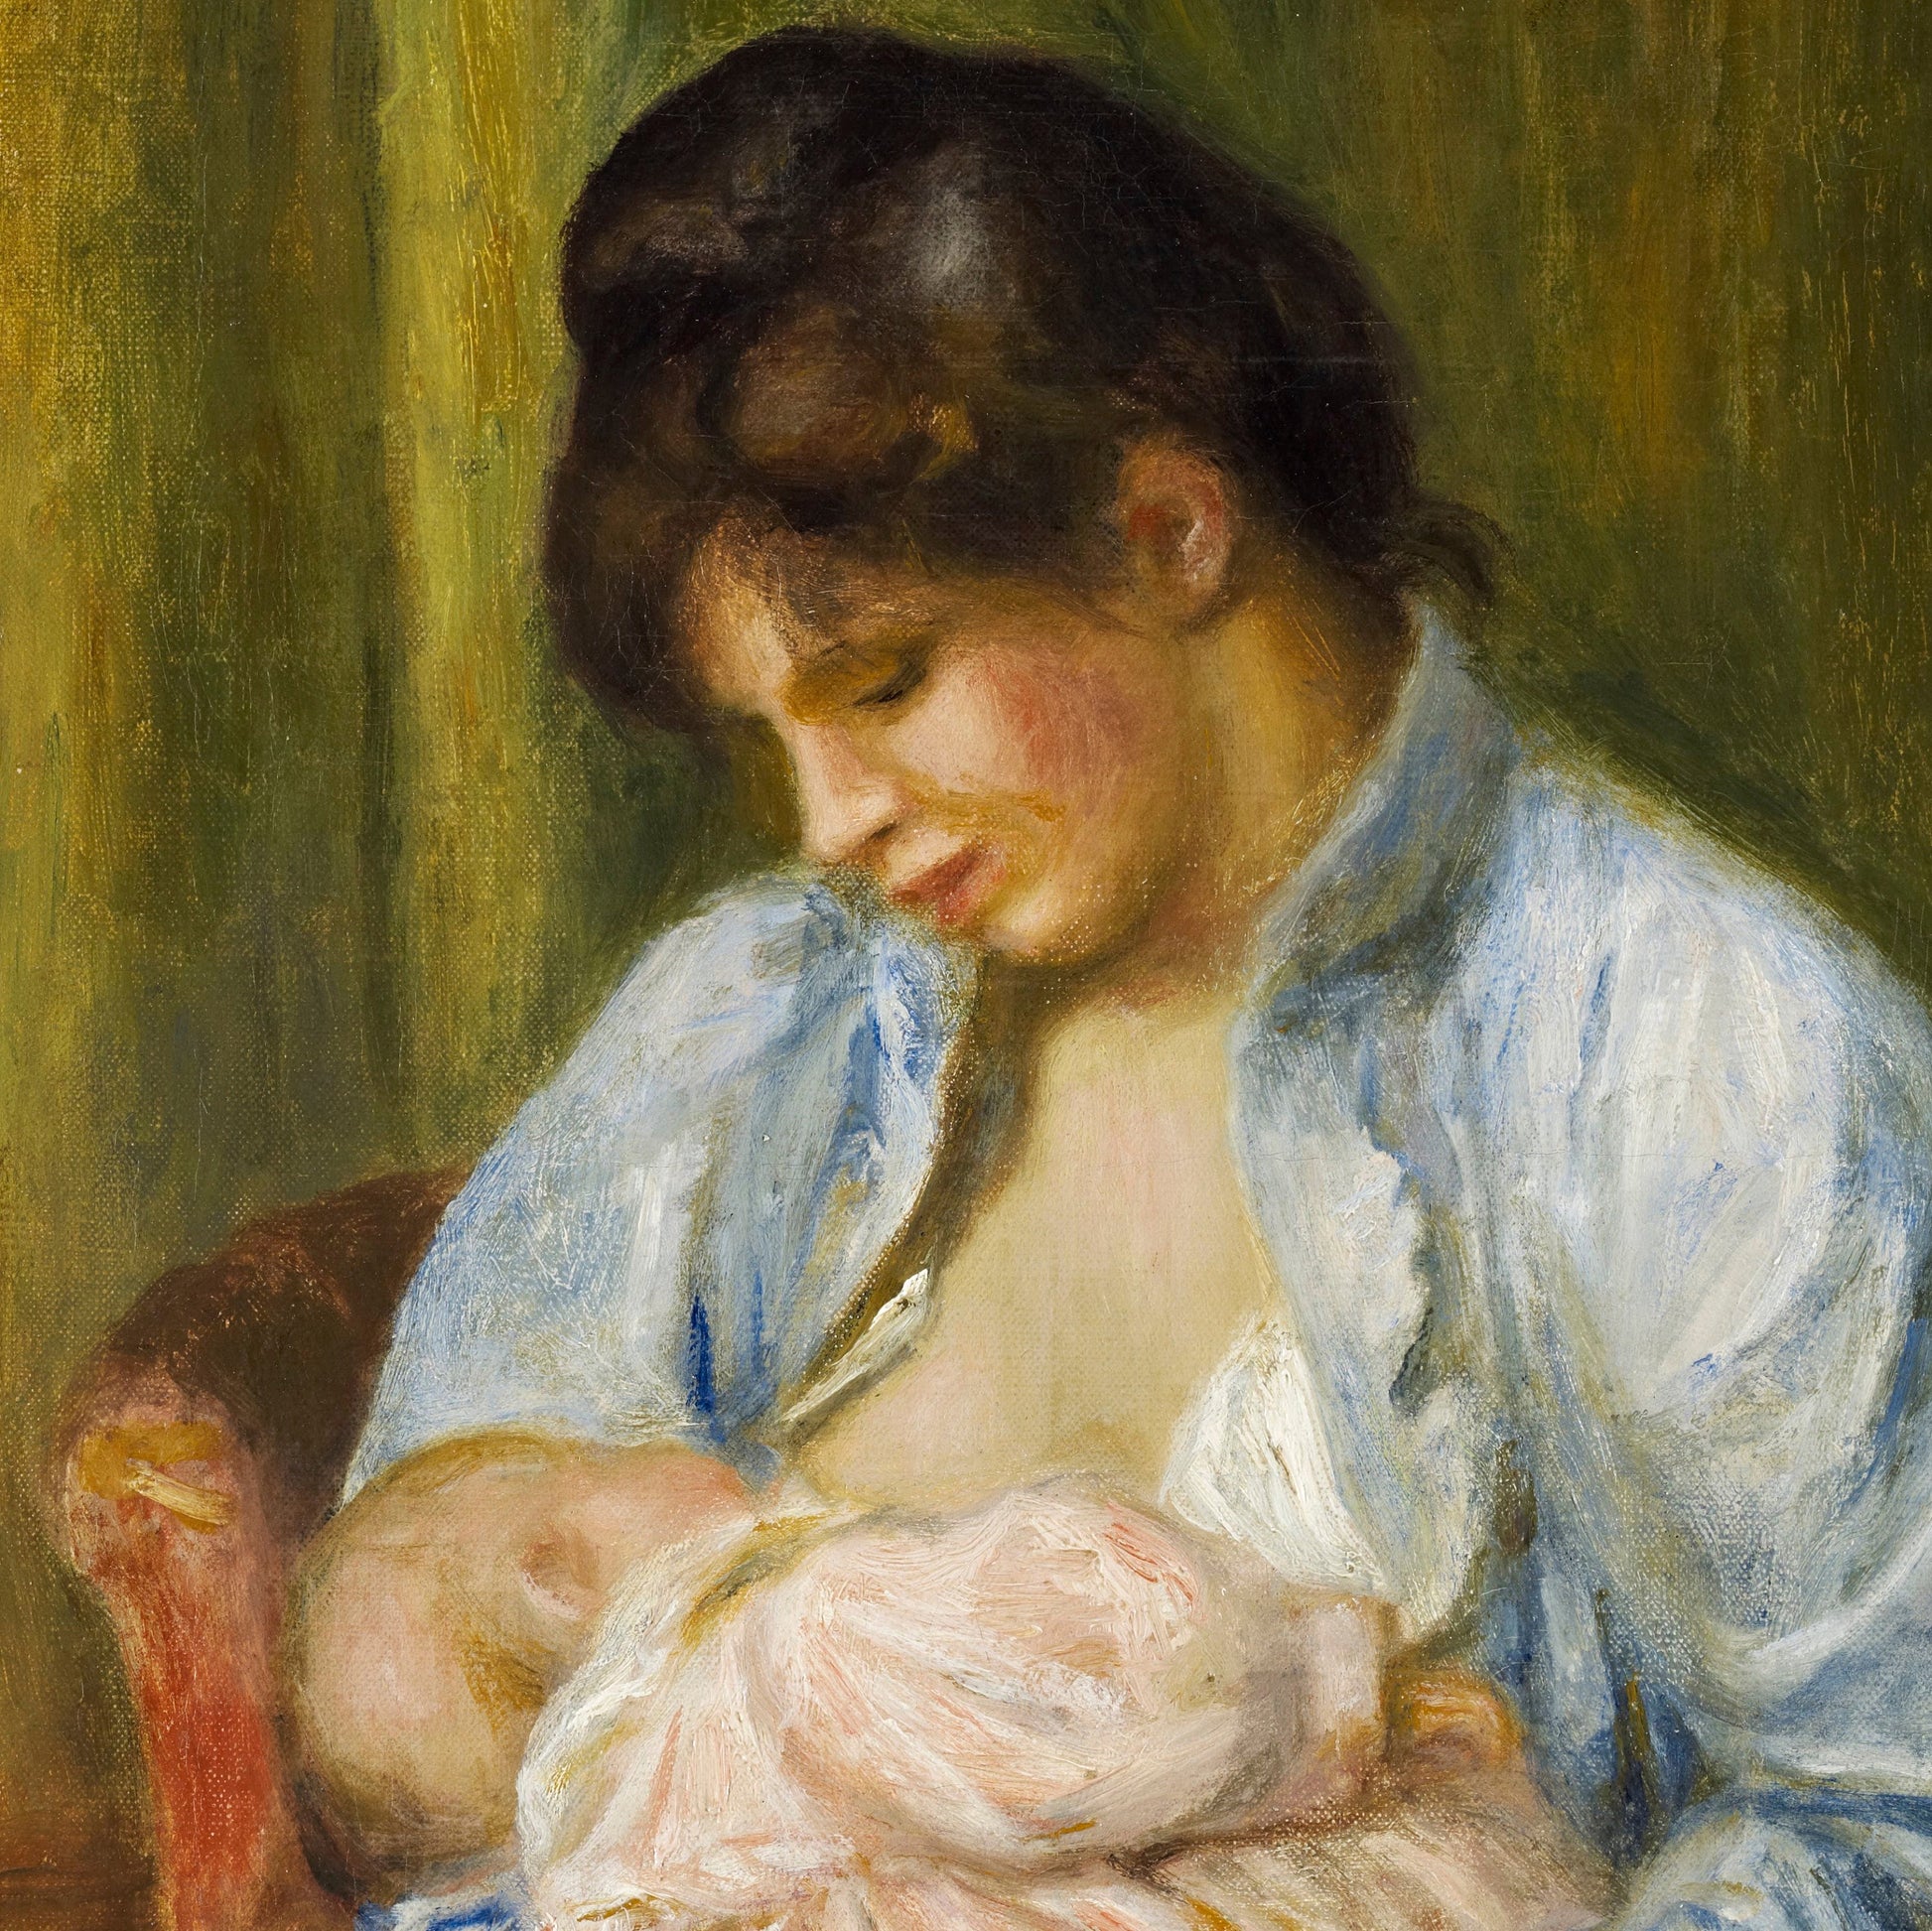 A Woman Nursing a Child by Pierre Auguste Renoir, 3d Printed with texture and brush strokes looks like original oil-painting, code:269